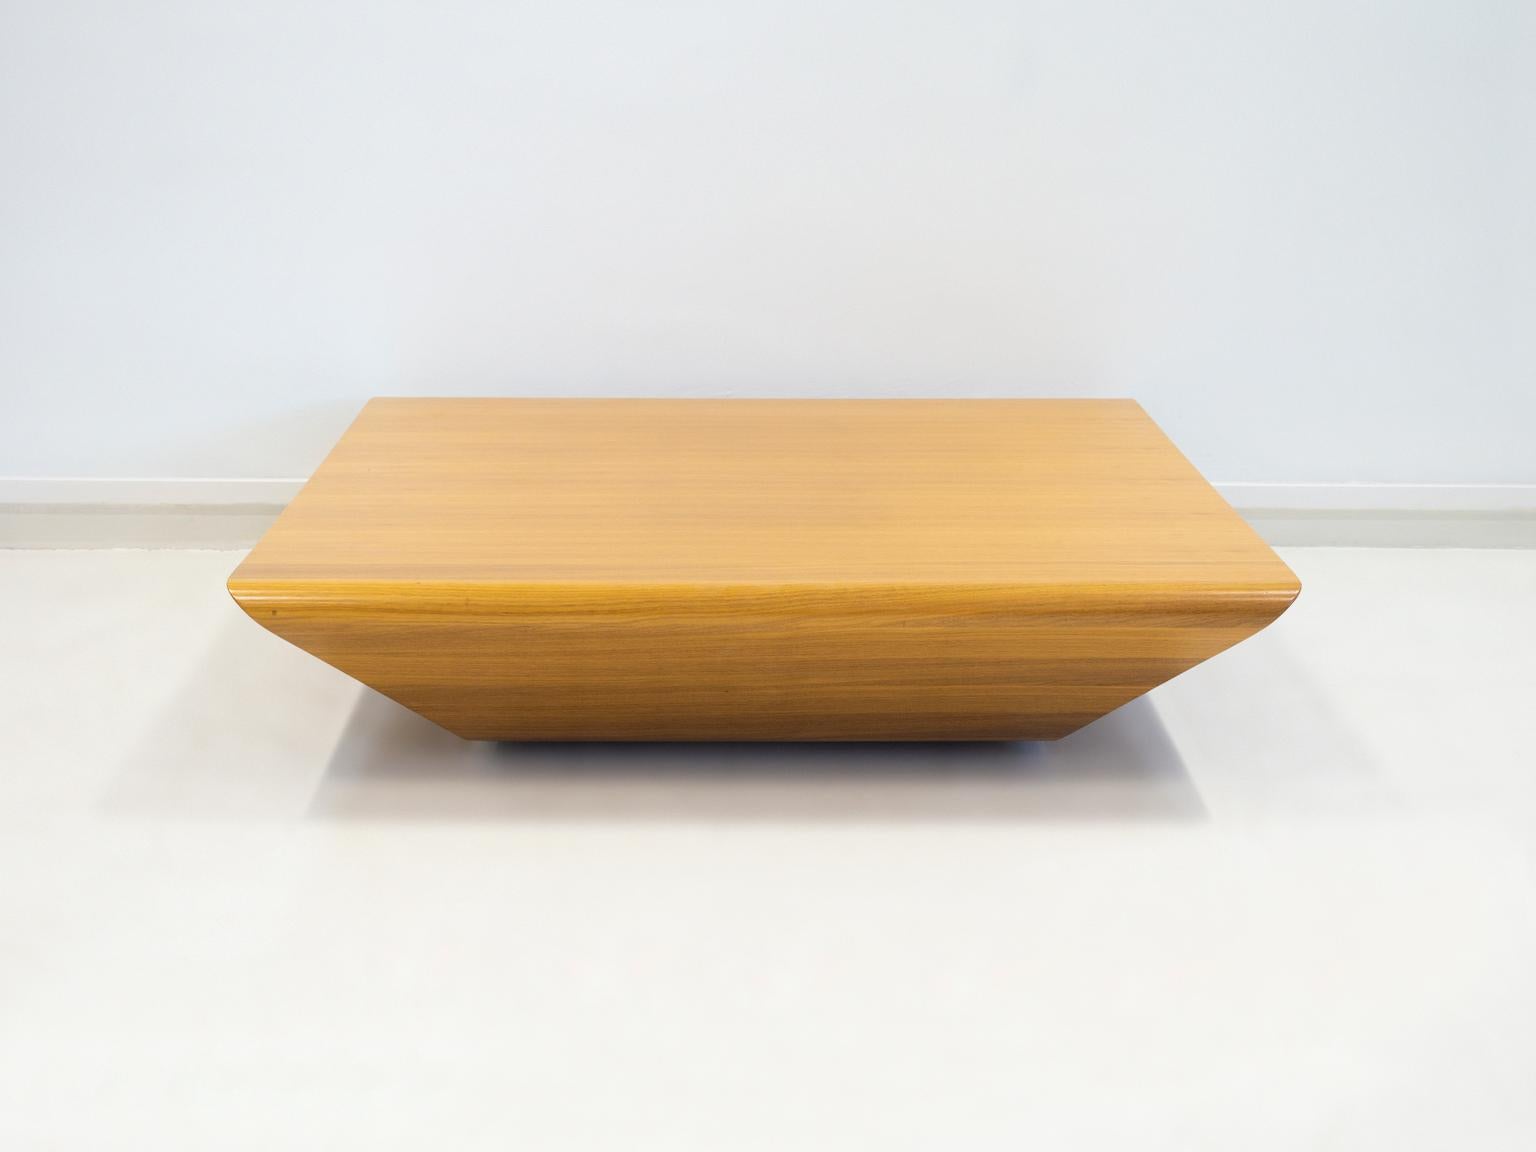 Minimalist coffee table Brasilia designed by Claesson, Eero Koivisto & Ola Rune for Swedese. The table is made in a single piece of layer-glued oak laminate and joined together without visible joints.